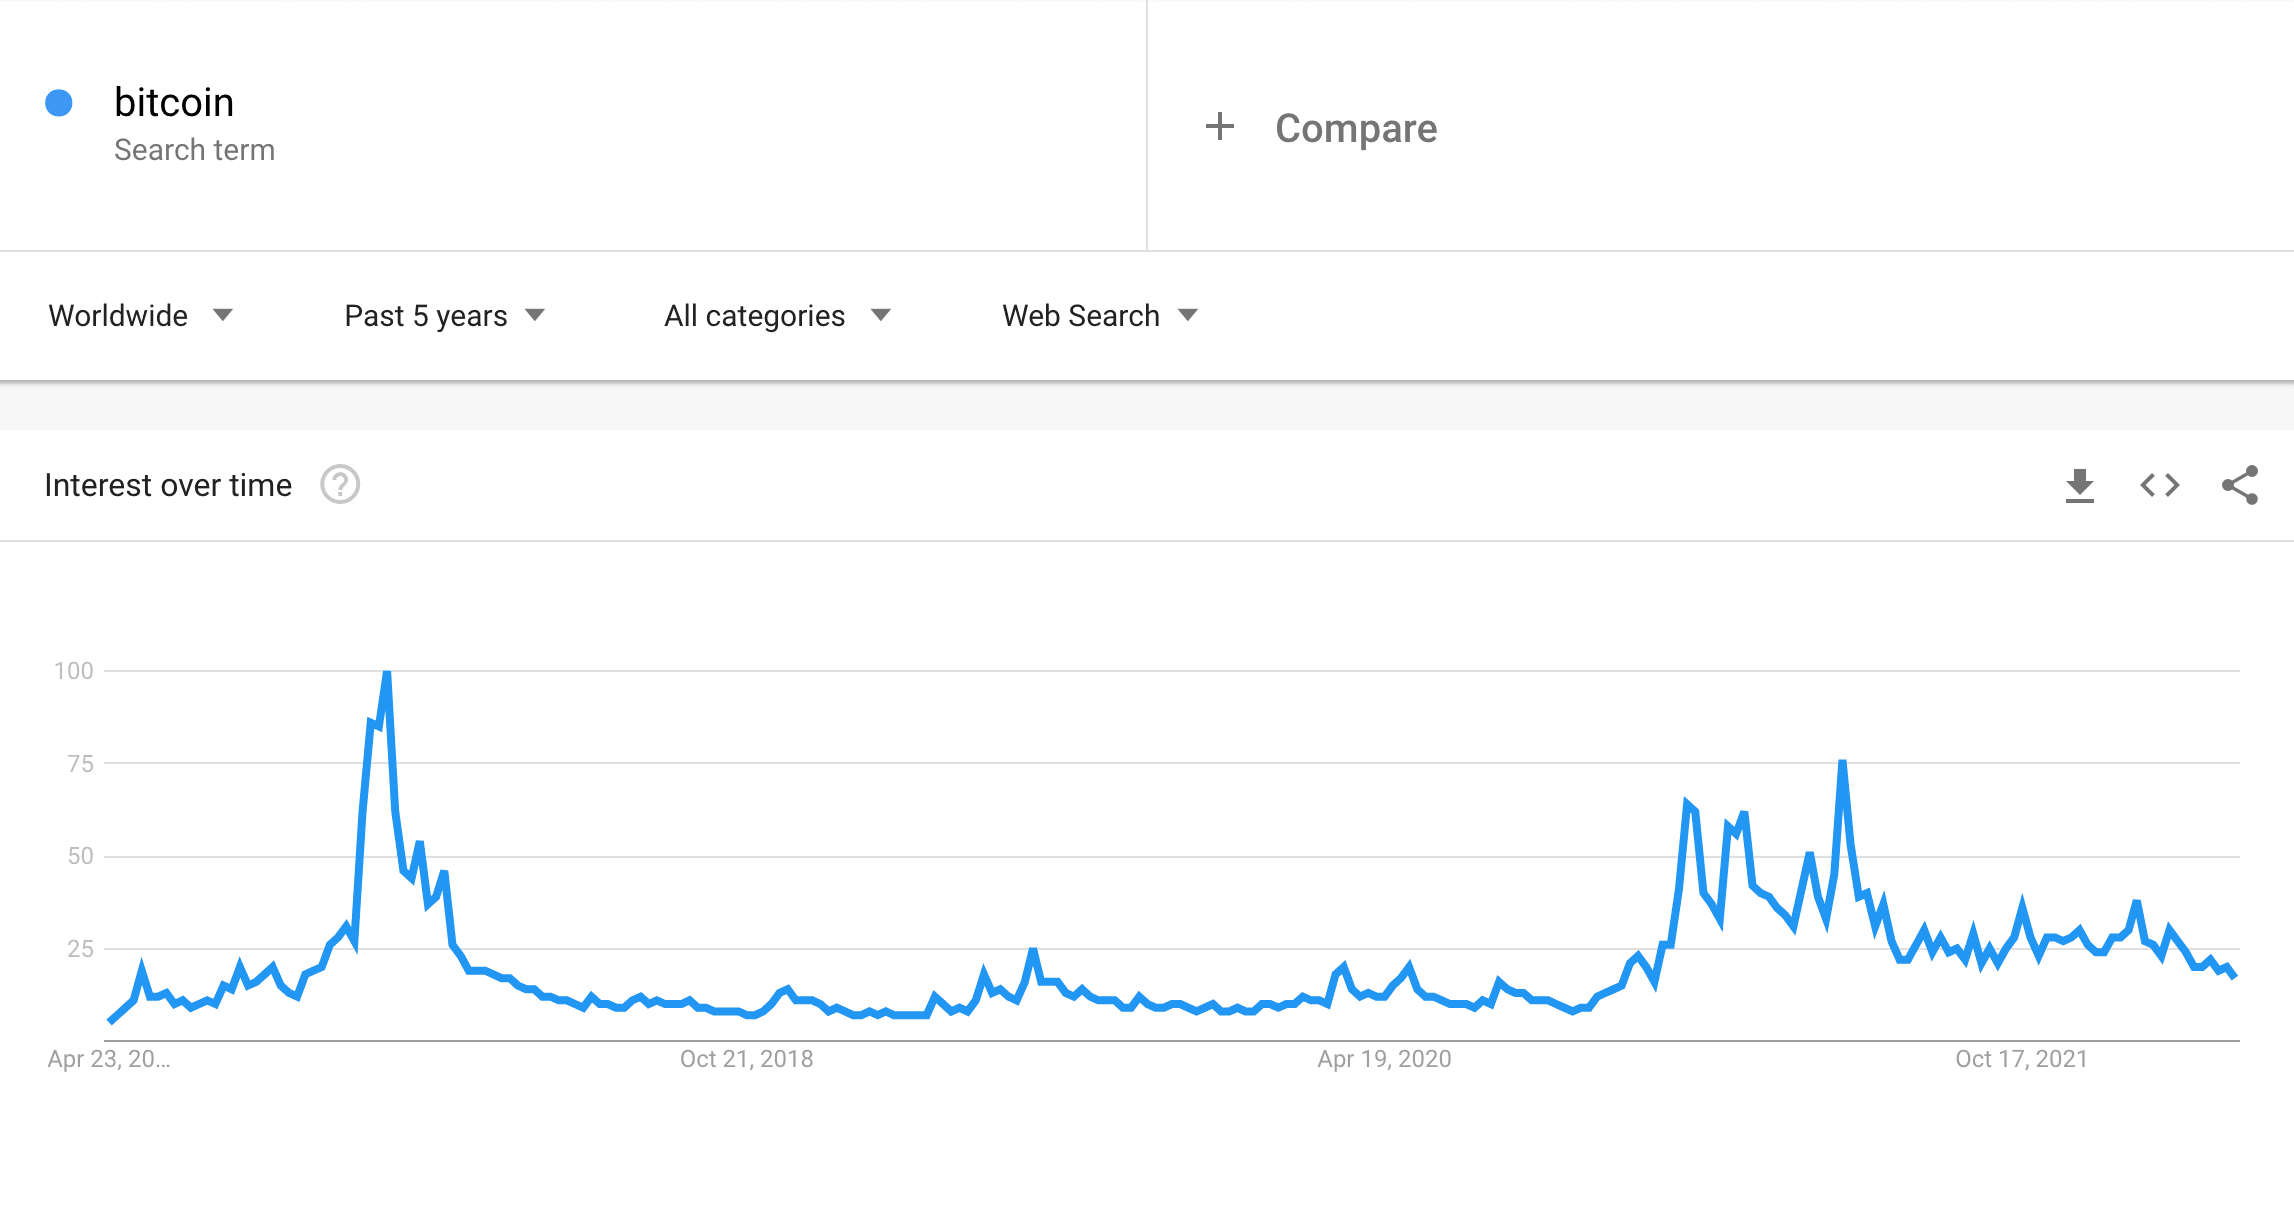 Google Trends graph featuring the interest in Bitcoin over the 5 years time span